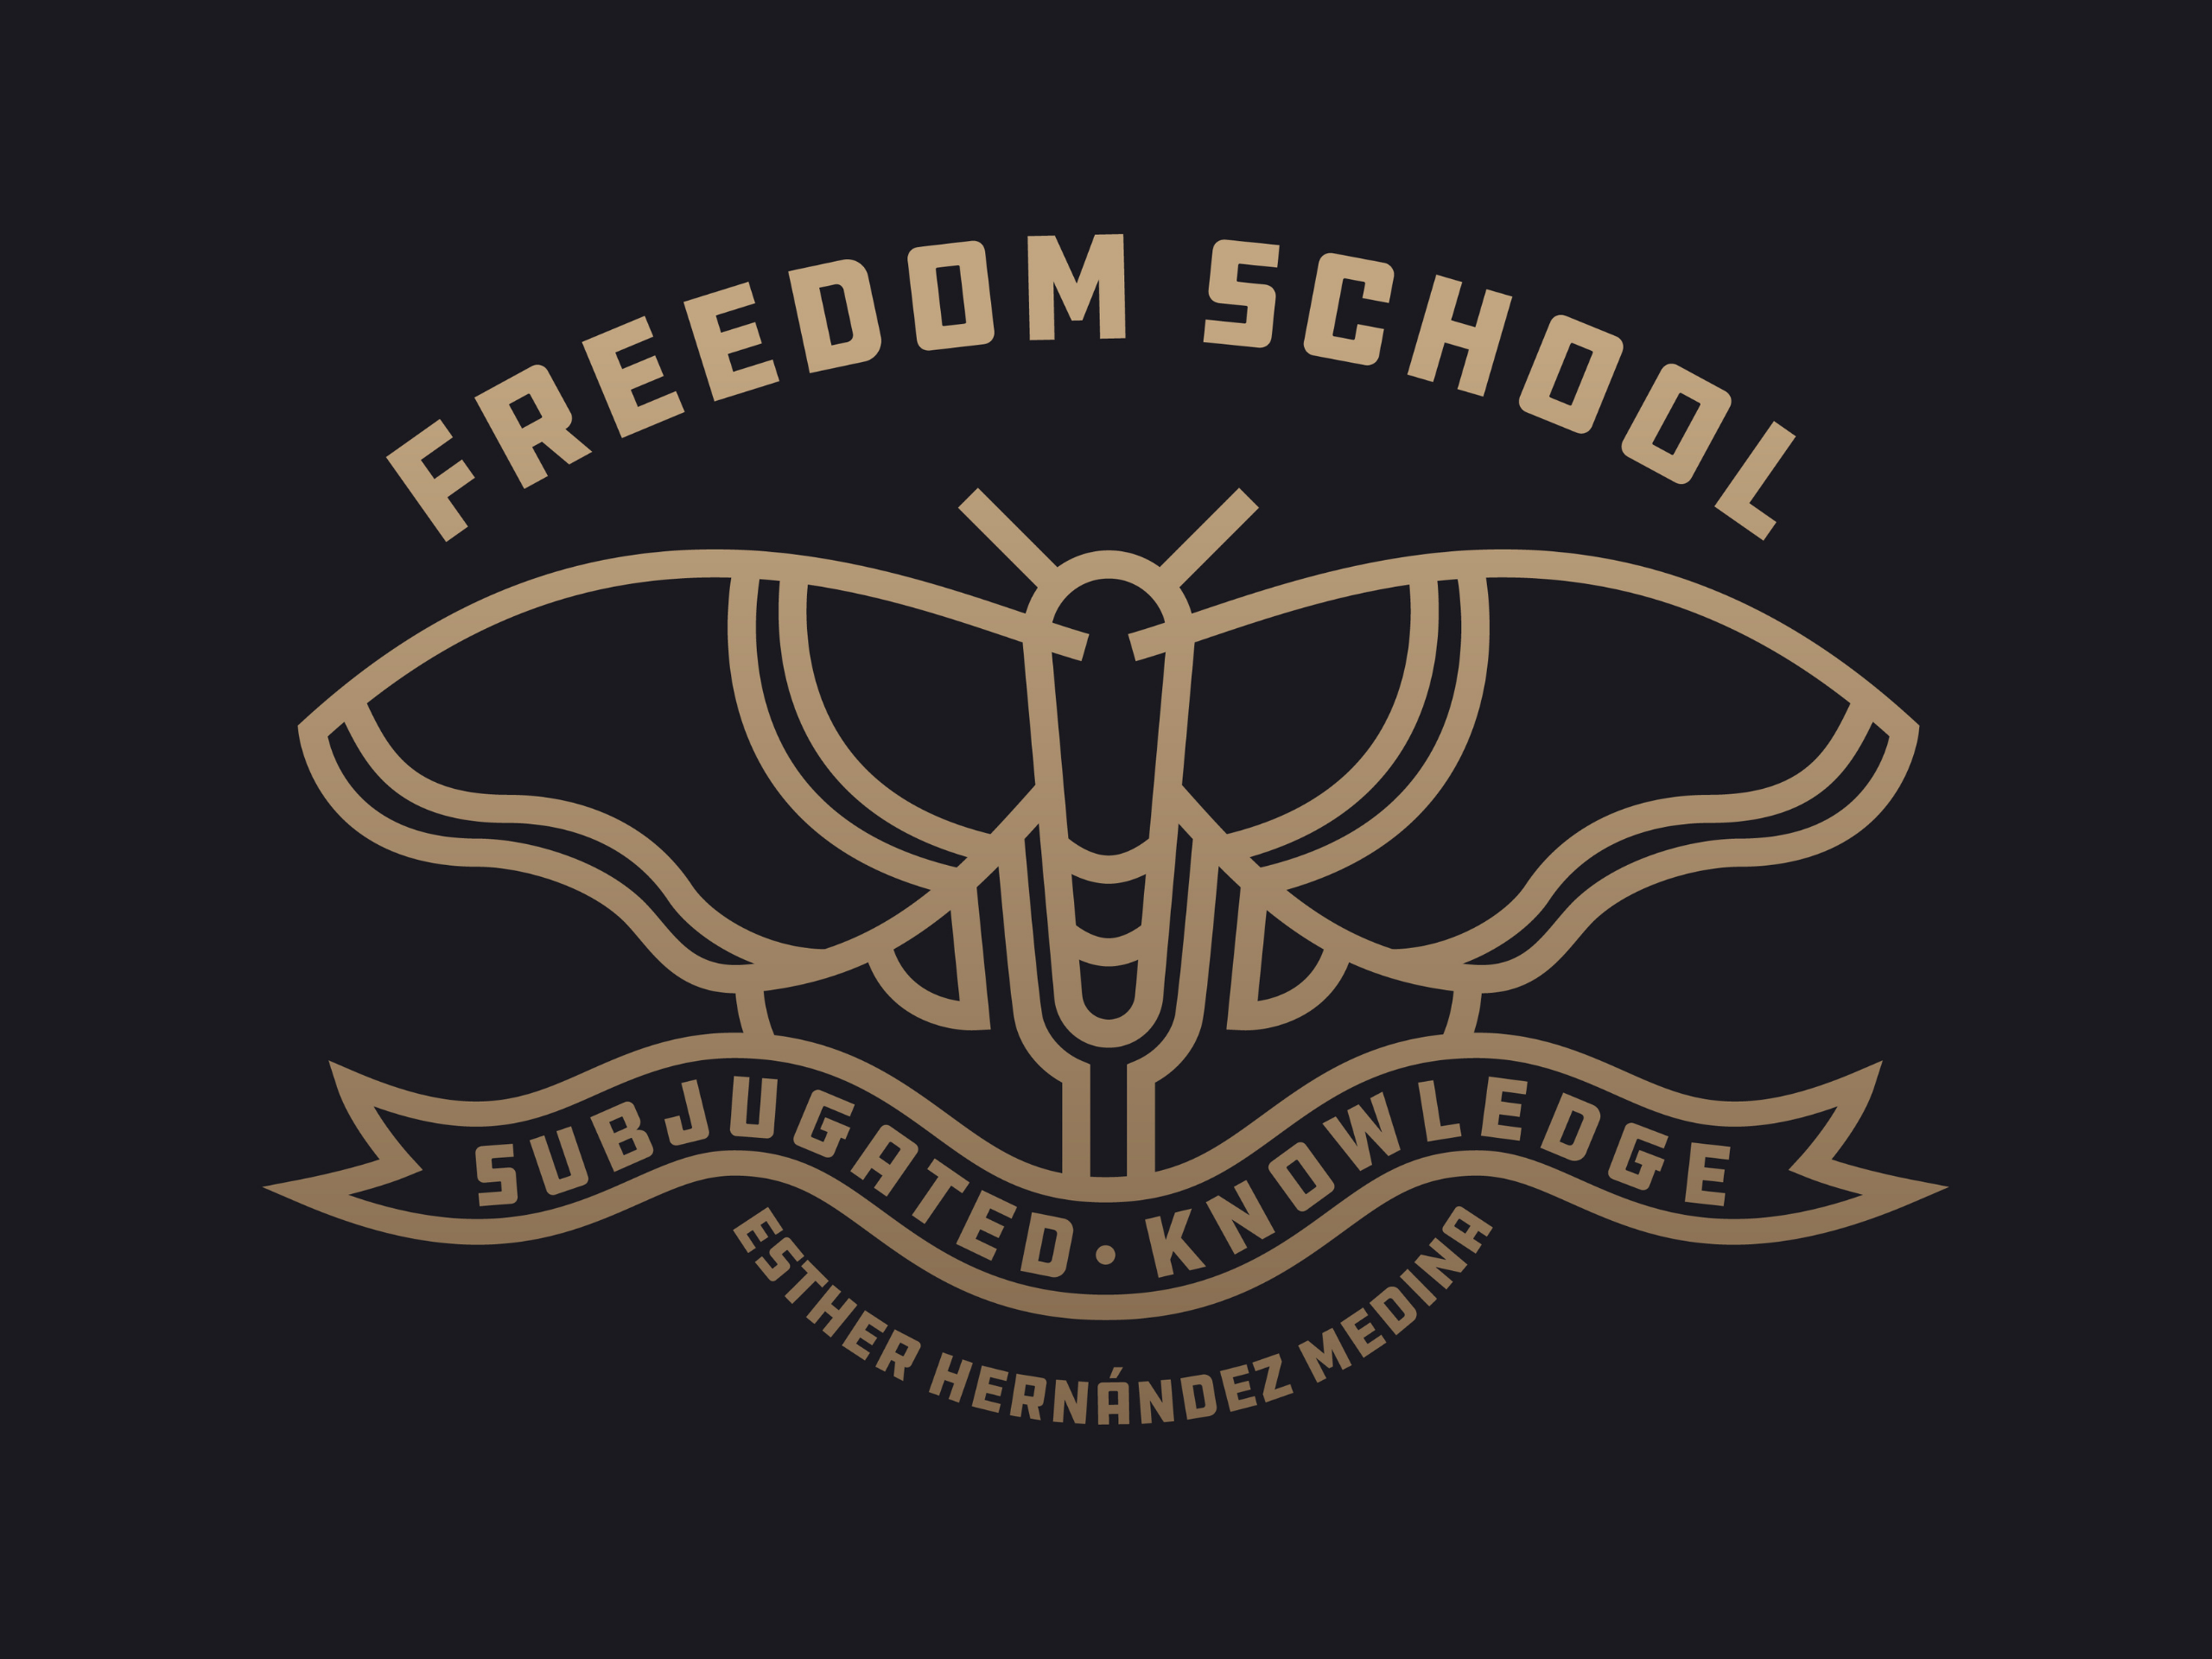 FREEDOM SCHOOL: THE FIGHT FOR LAS 3 CAUSALES